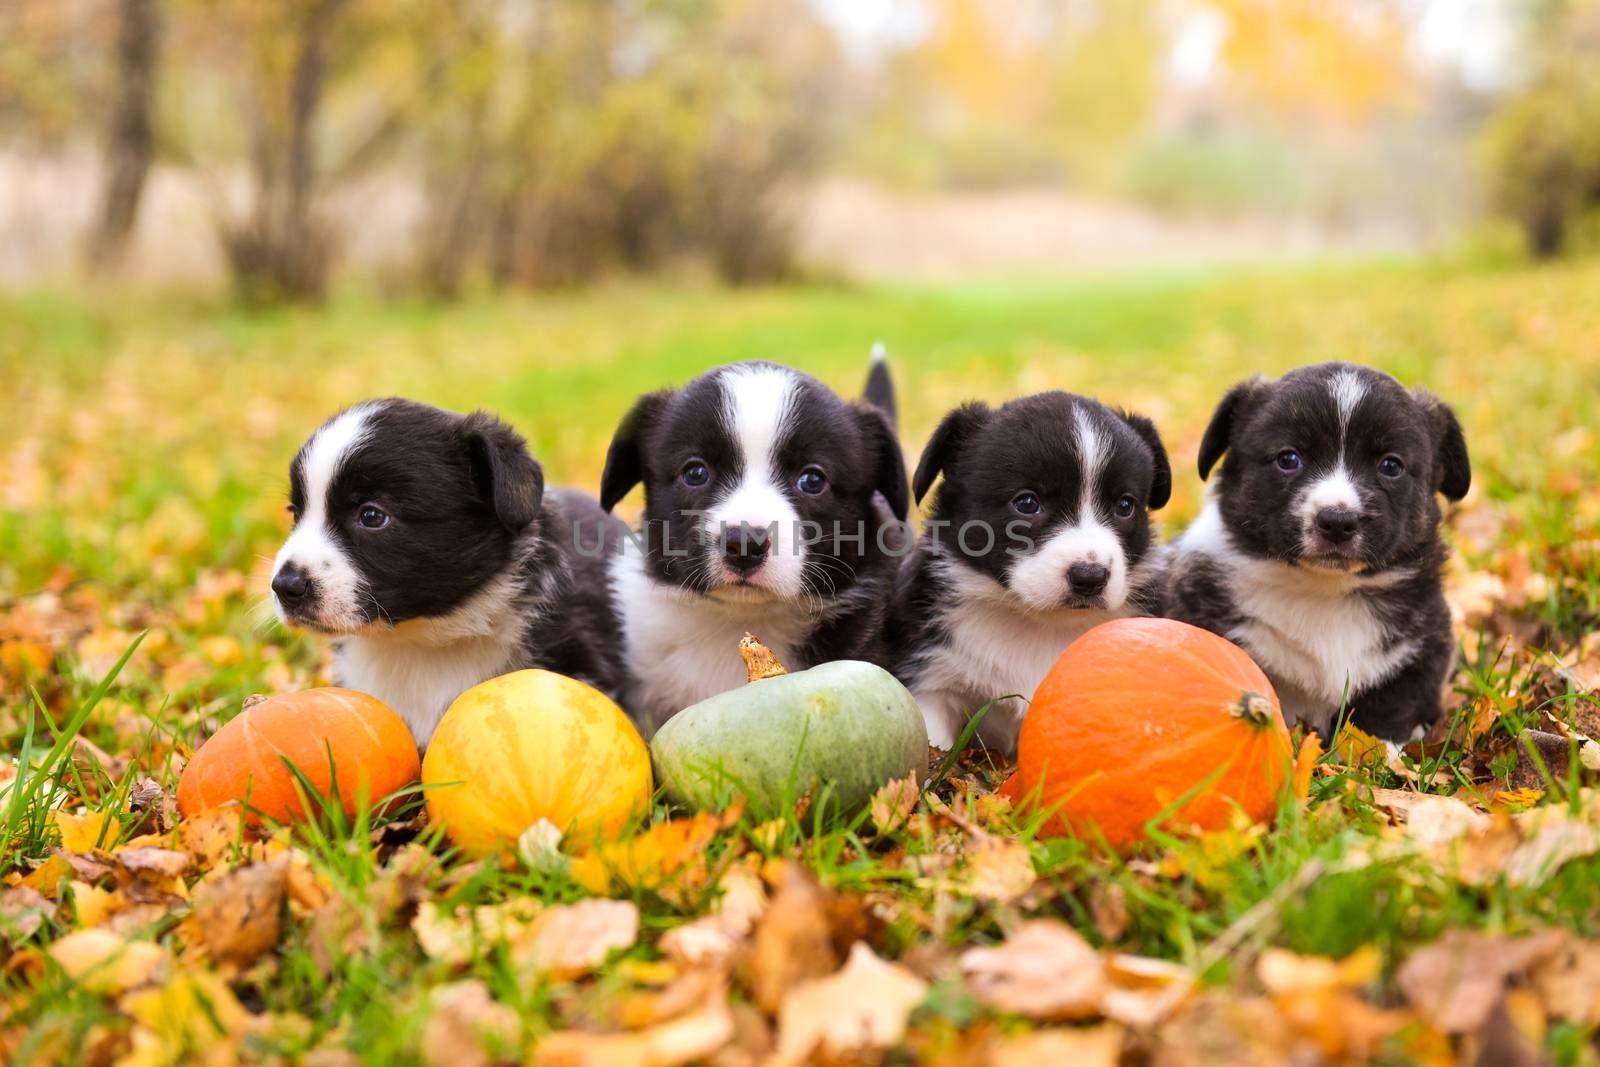 Corgi puppies dogs with a pumpkin in the basket by infinityyy